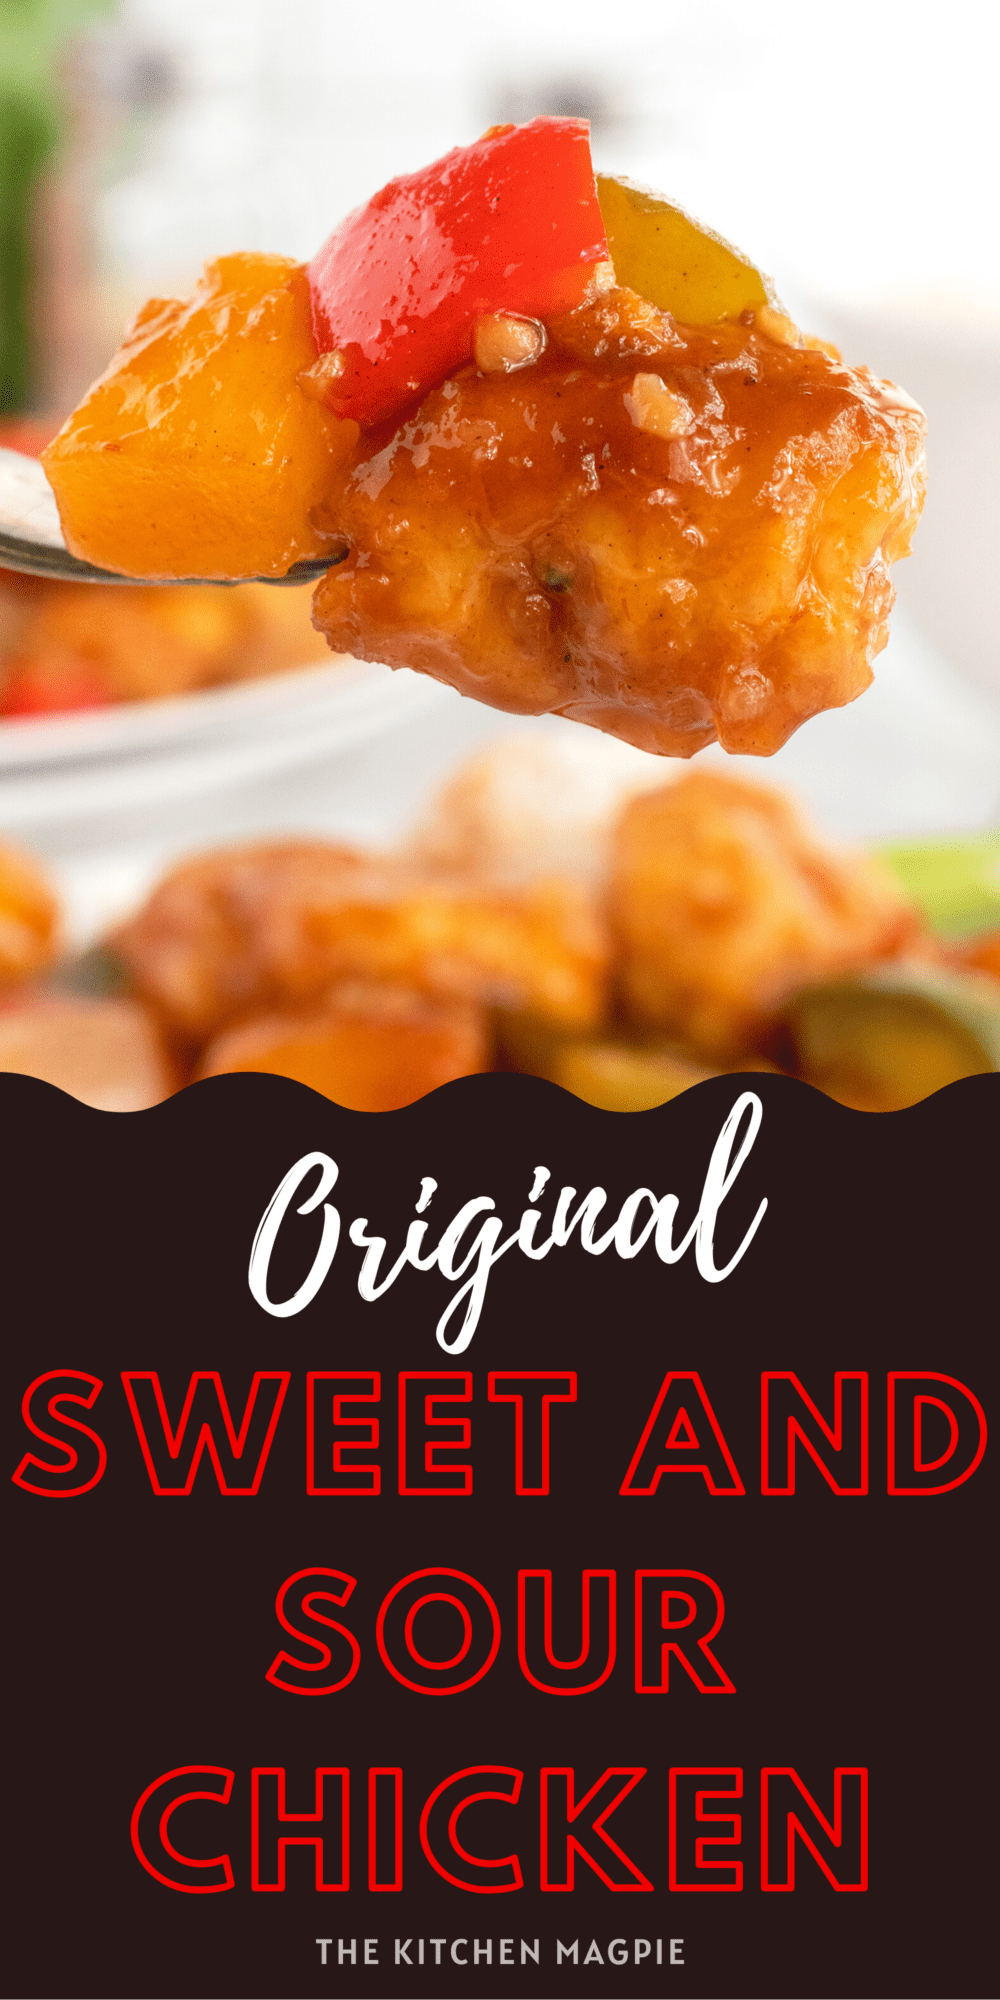 This Sweet and Sour Chicken is filled with onion and bell peppers exploding with tangy flavor, just like your favorite take out!